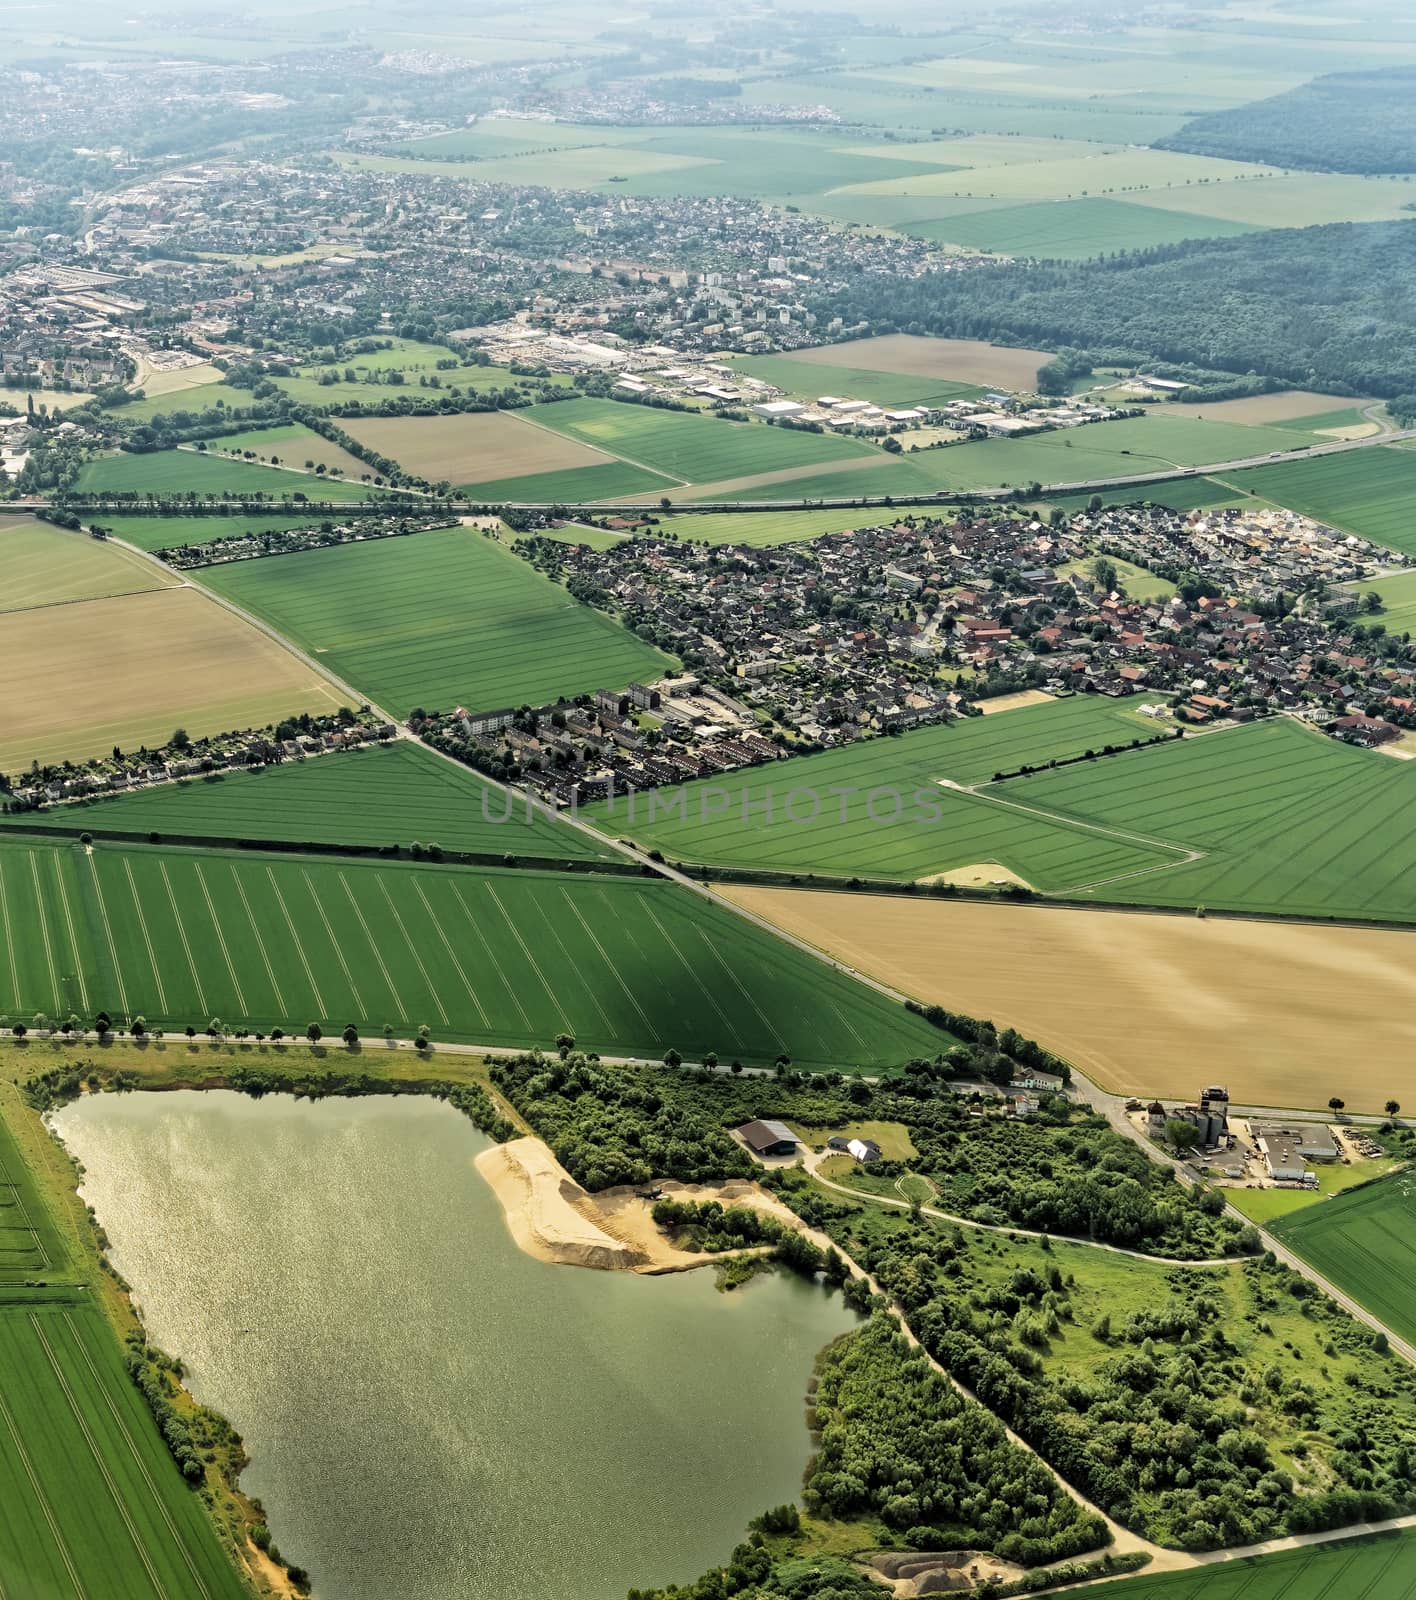 Suburb of Braunschweig, Germany with a water-filled former gravel pit in the foreground, village structure with fields and meadows, aerial photo by geogif